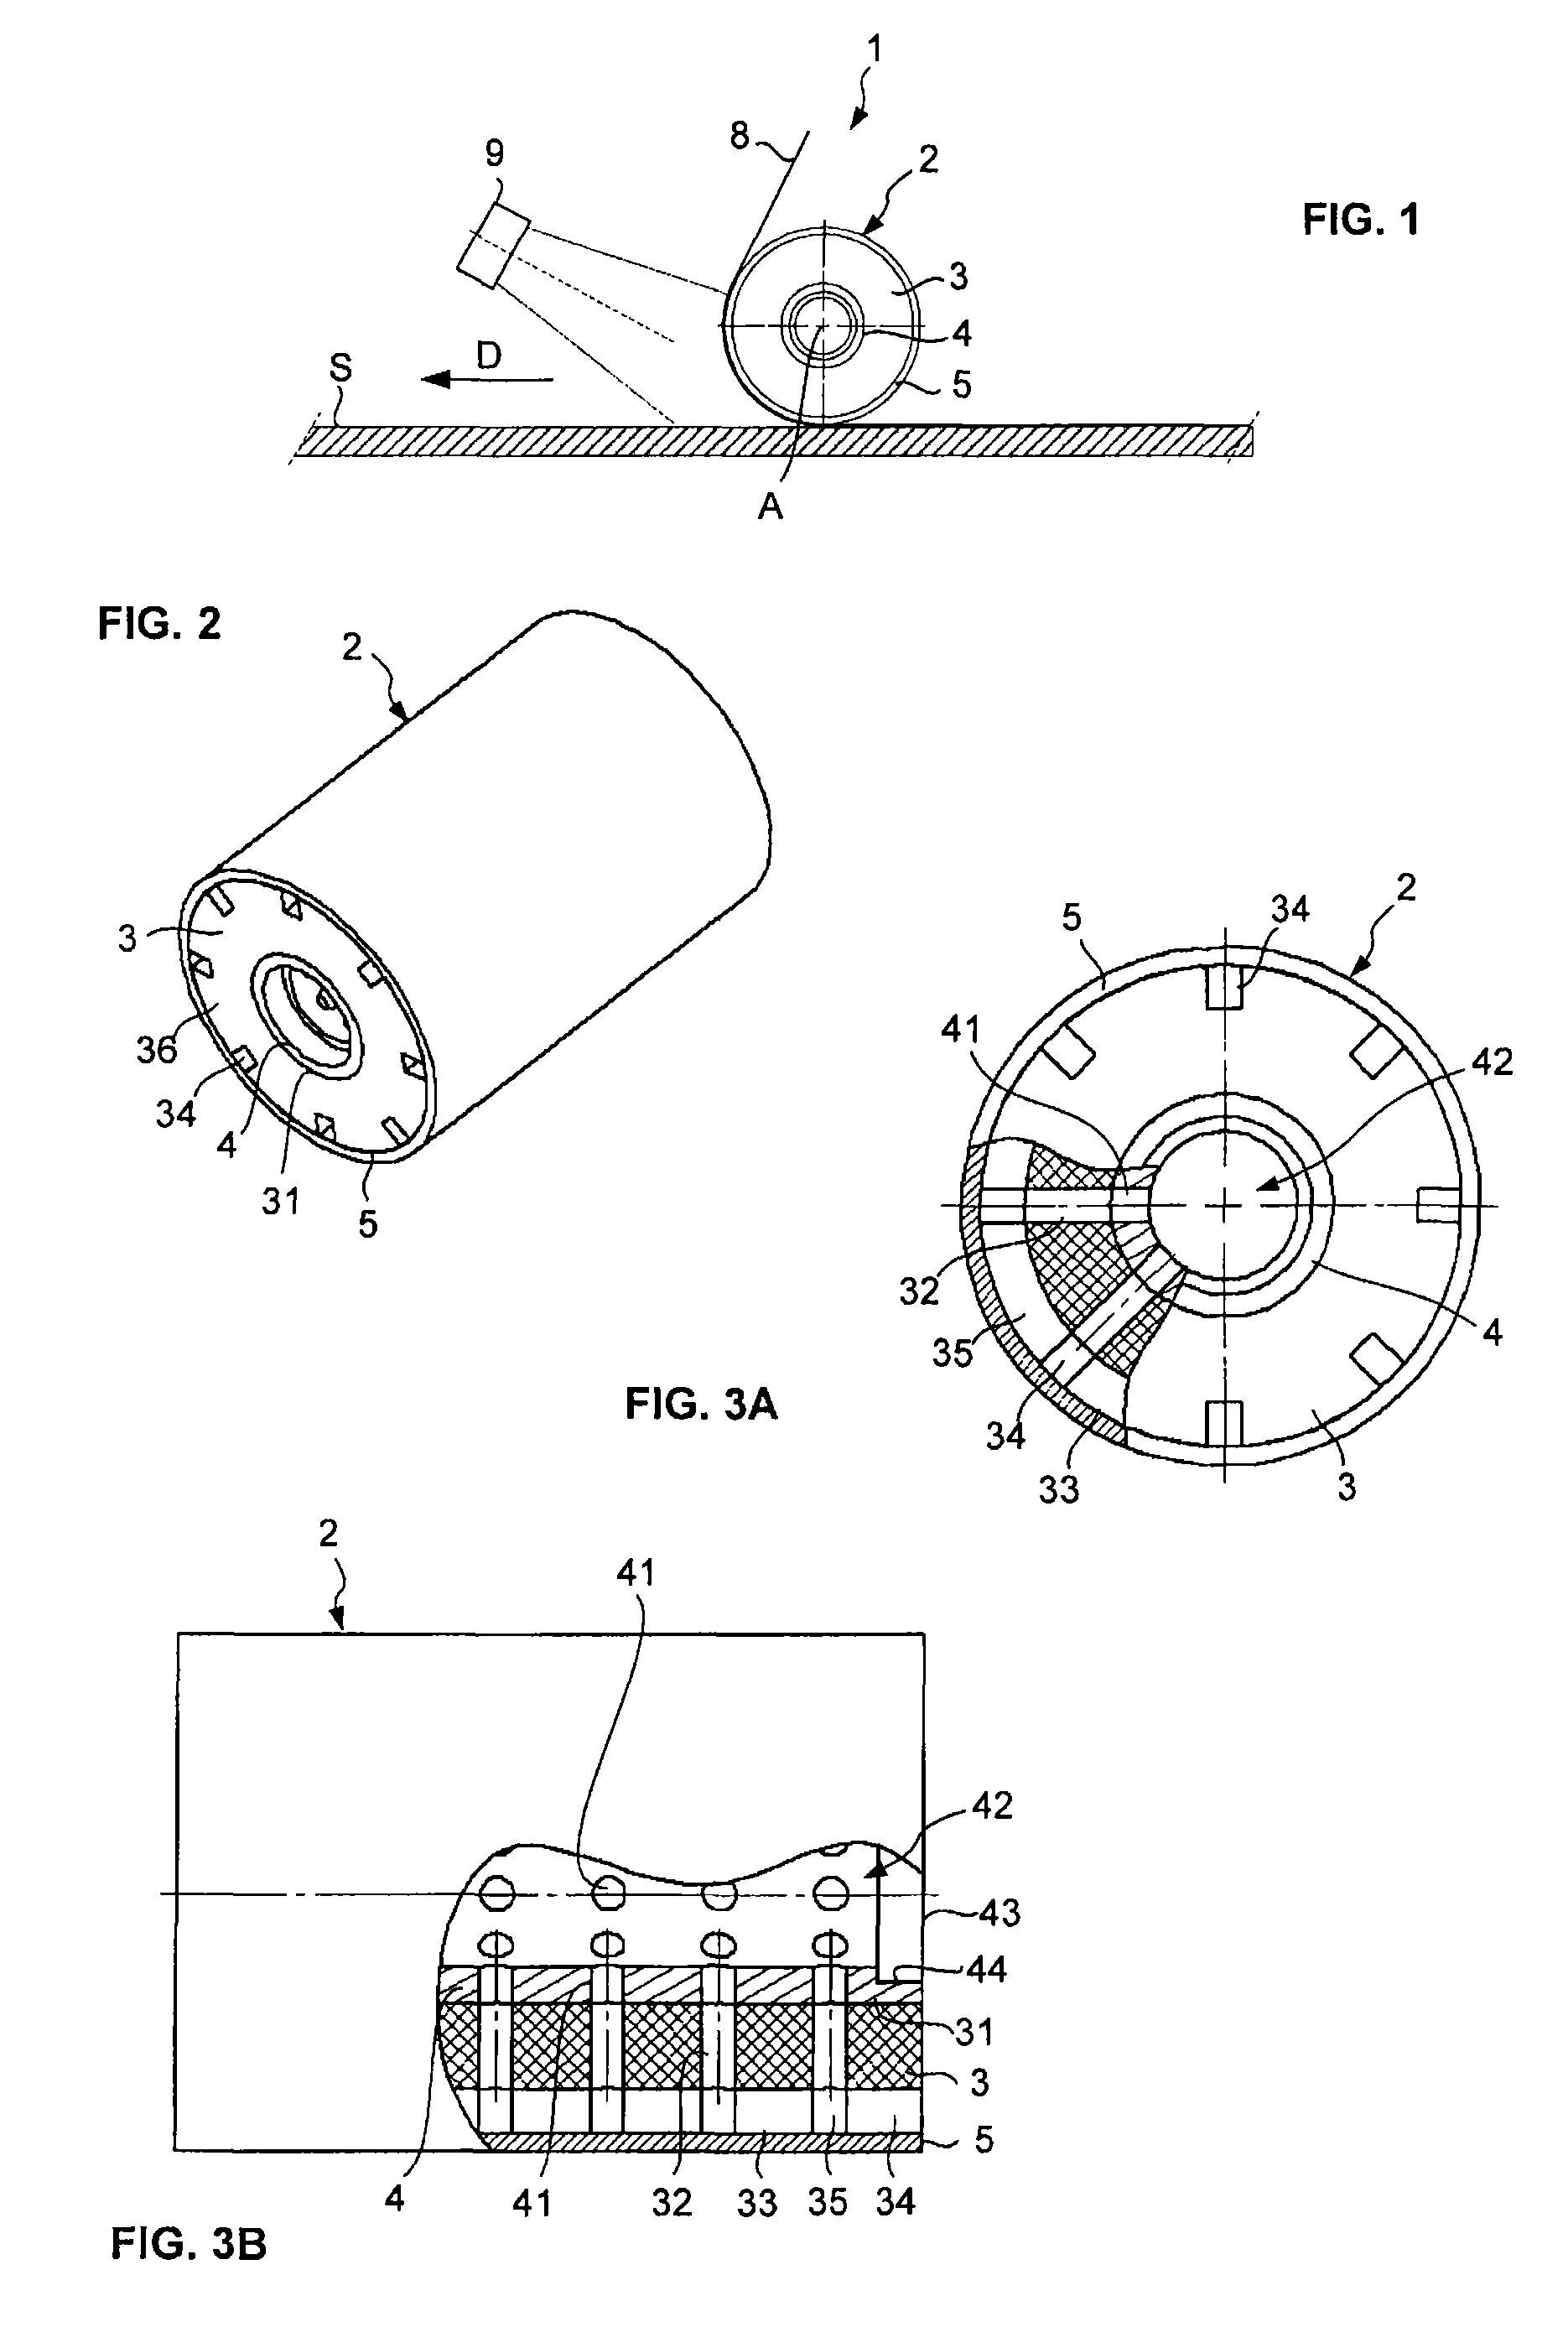 Fiber application machine comprising a flexible compacting roller with a thermal regulation system